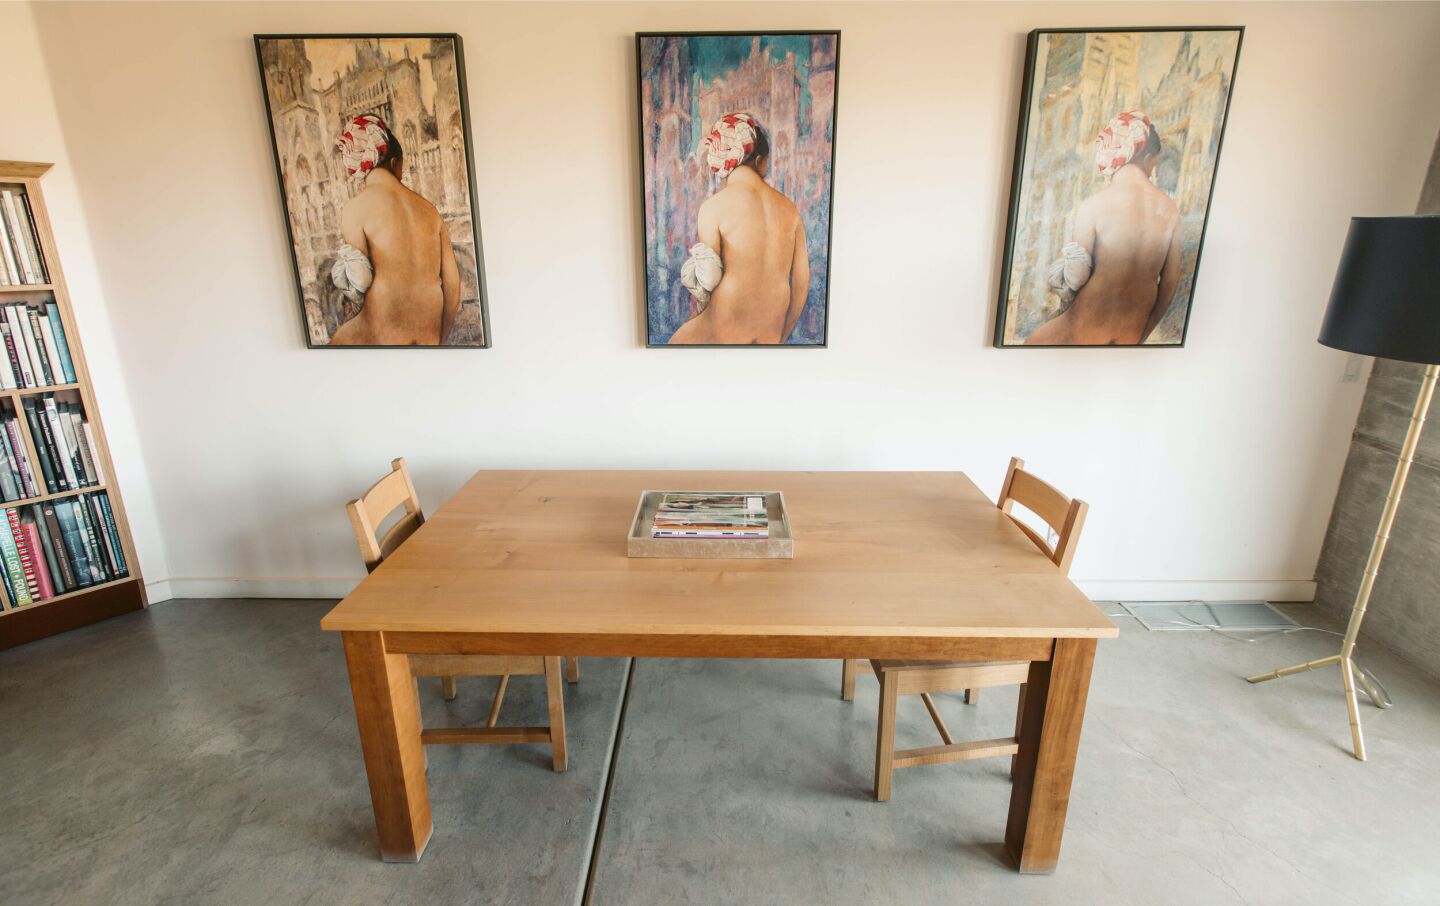 A table for two sits against a white wall with three works of art.